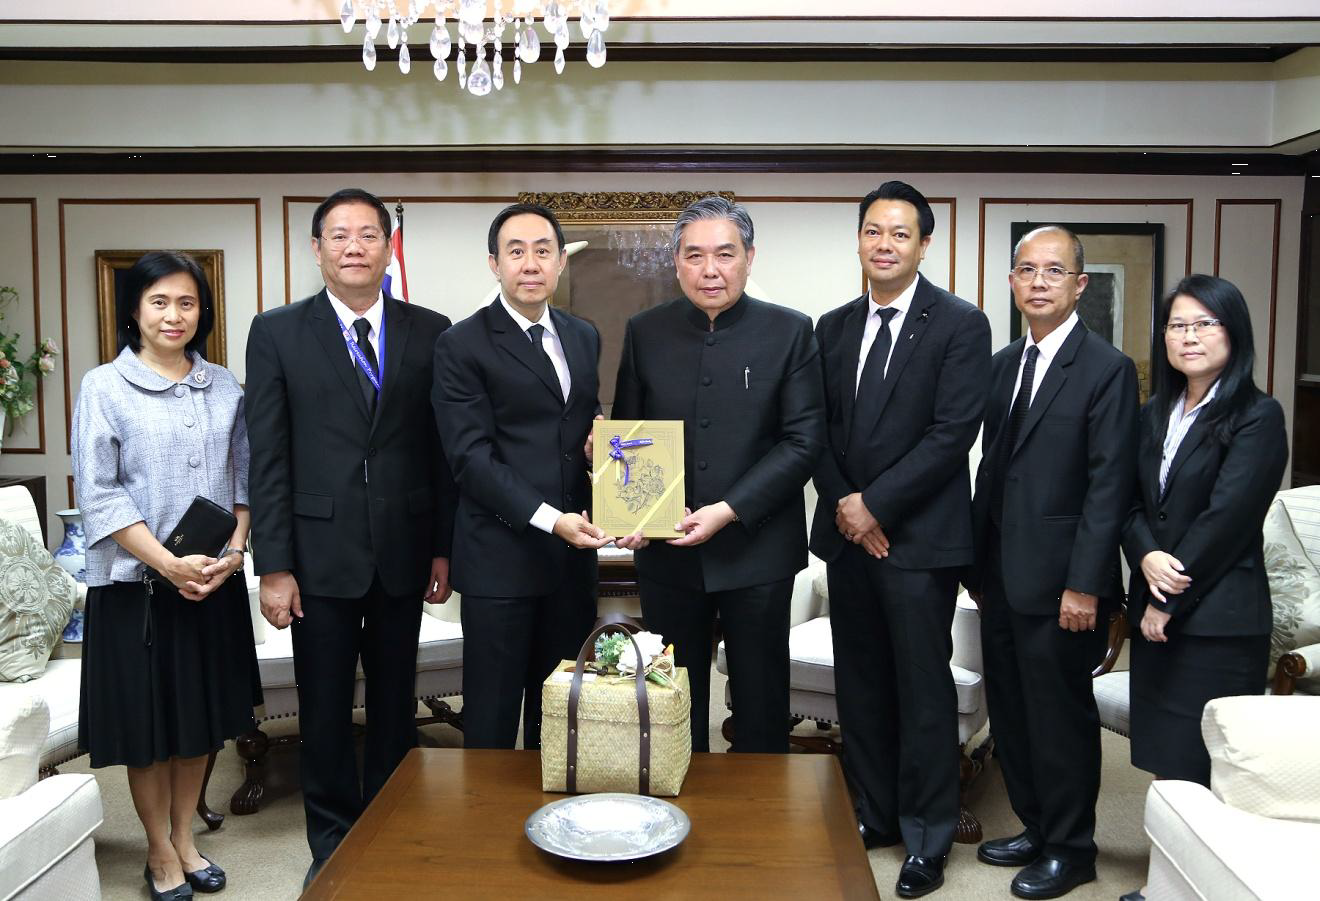 EXIM Thailand Visits Minister of Finance to Extend New Year 2017 Greetings